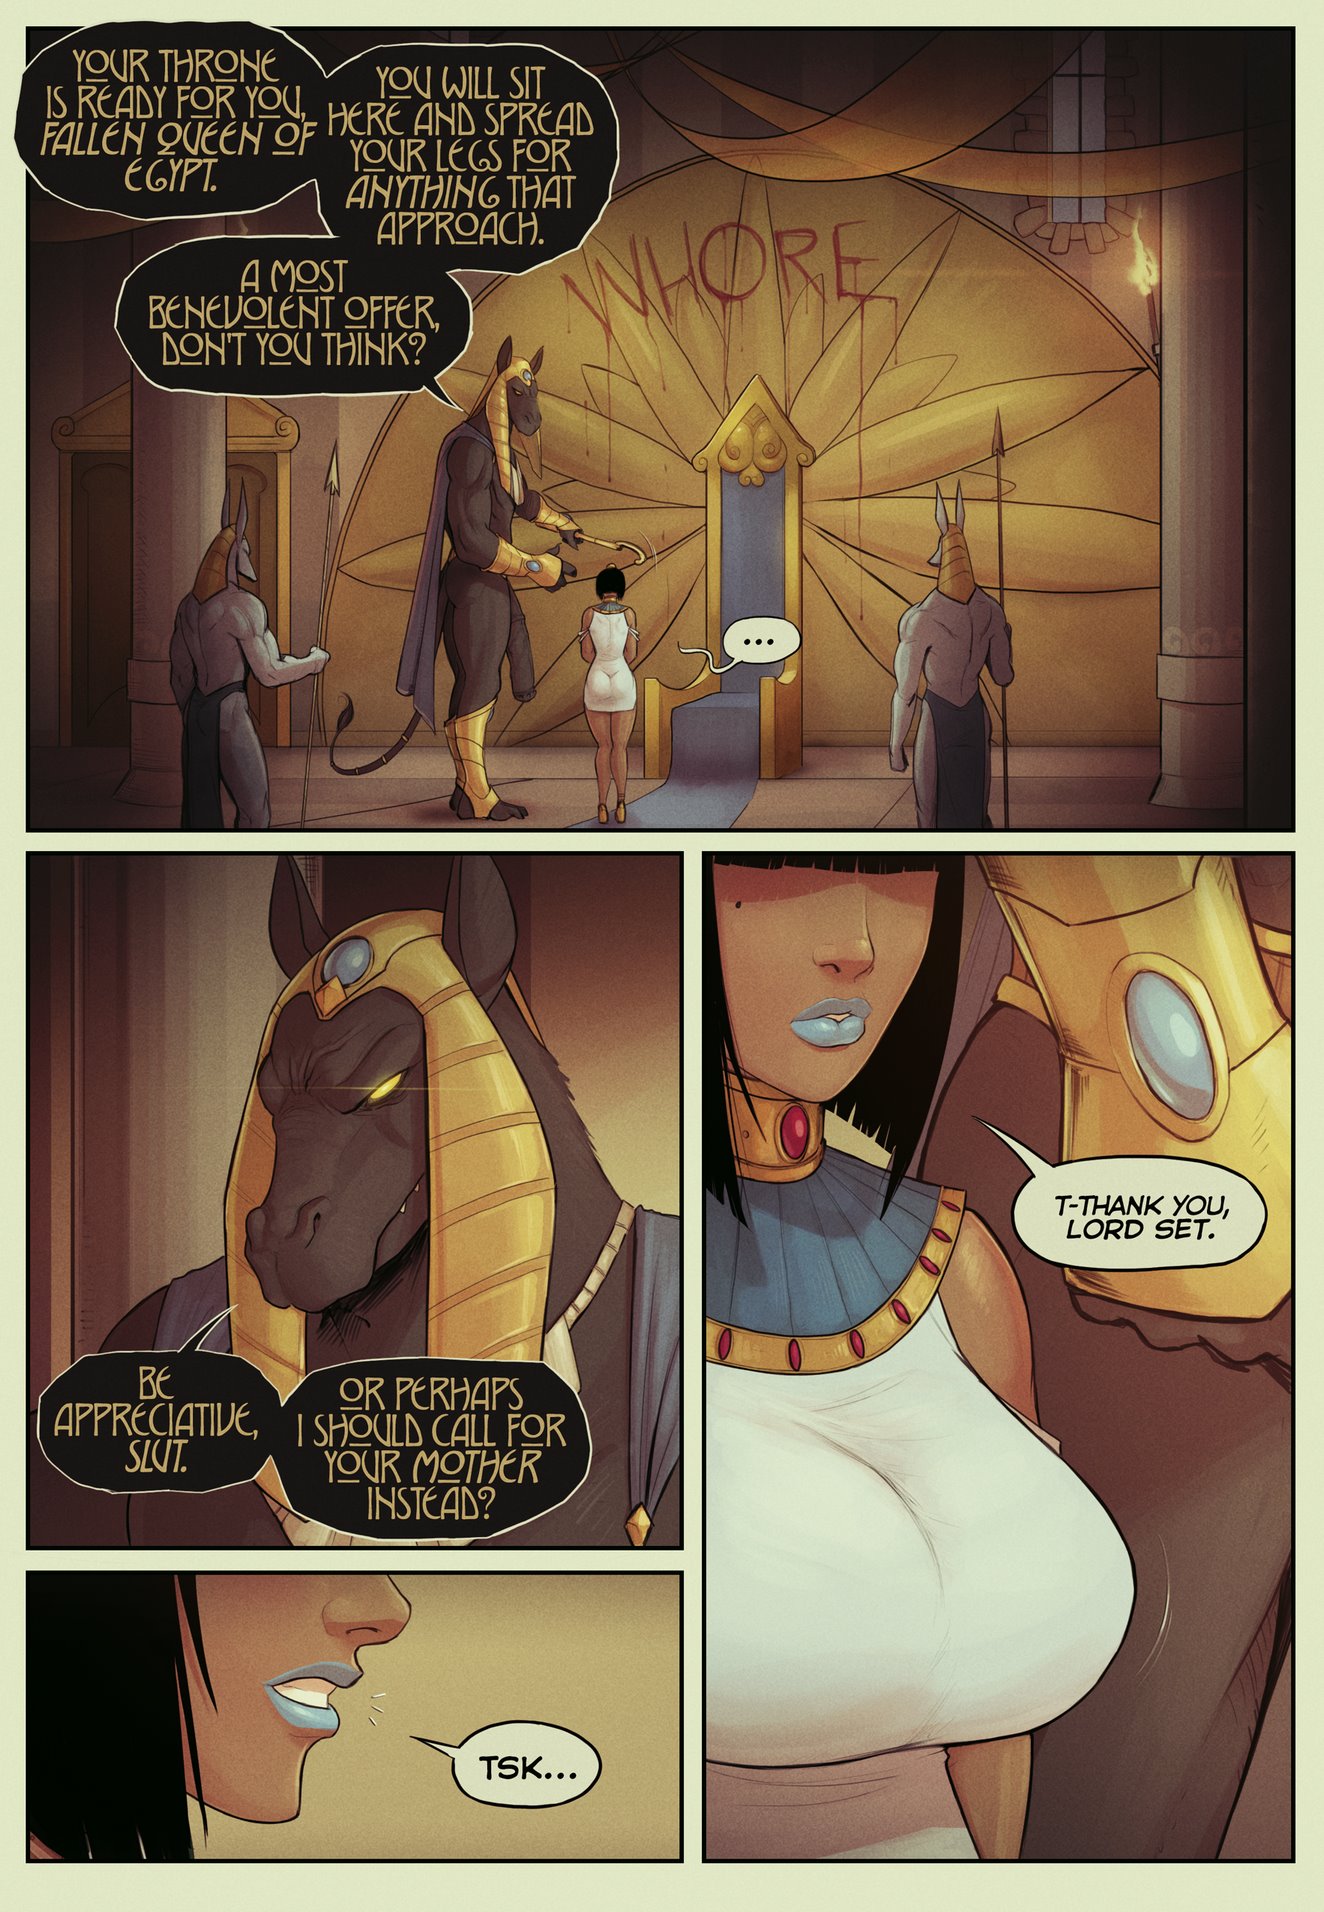 Legend of queen Opala In the shadow of anubis chapter one.